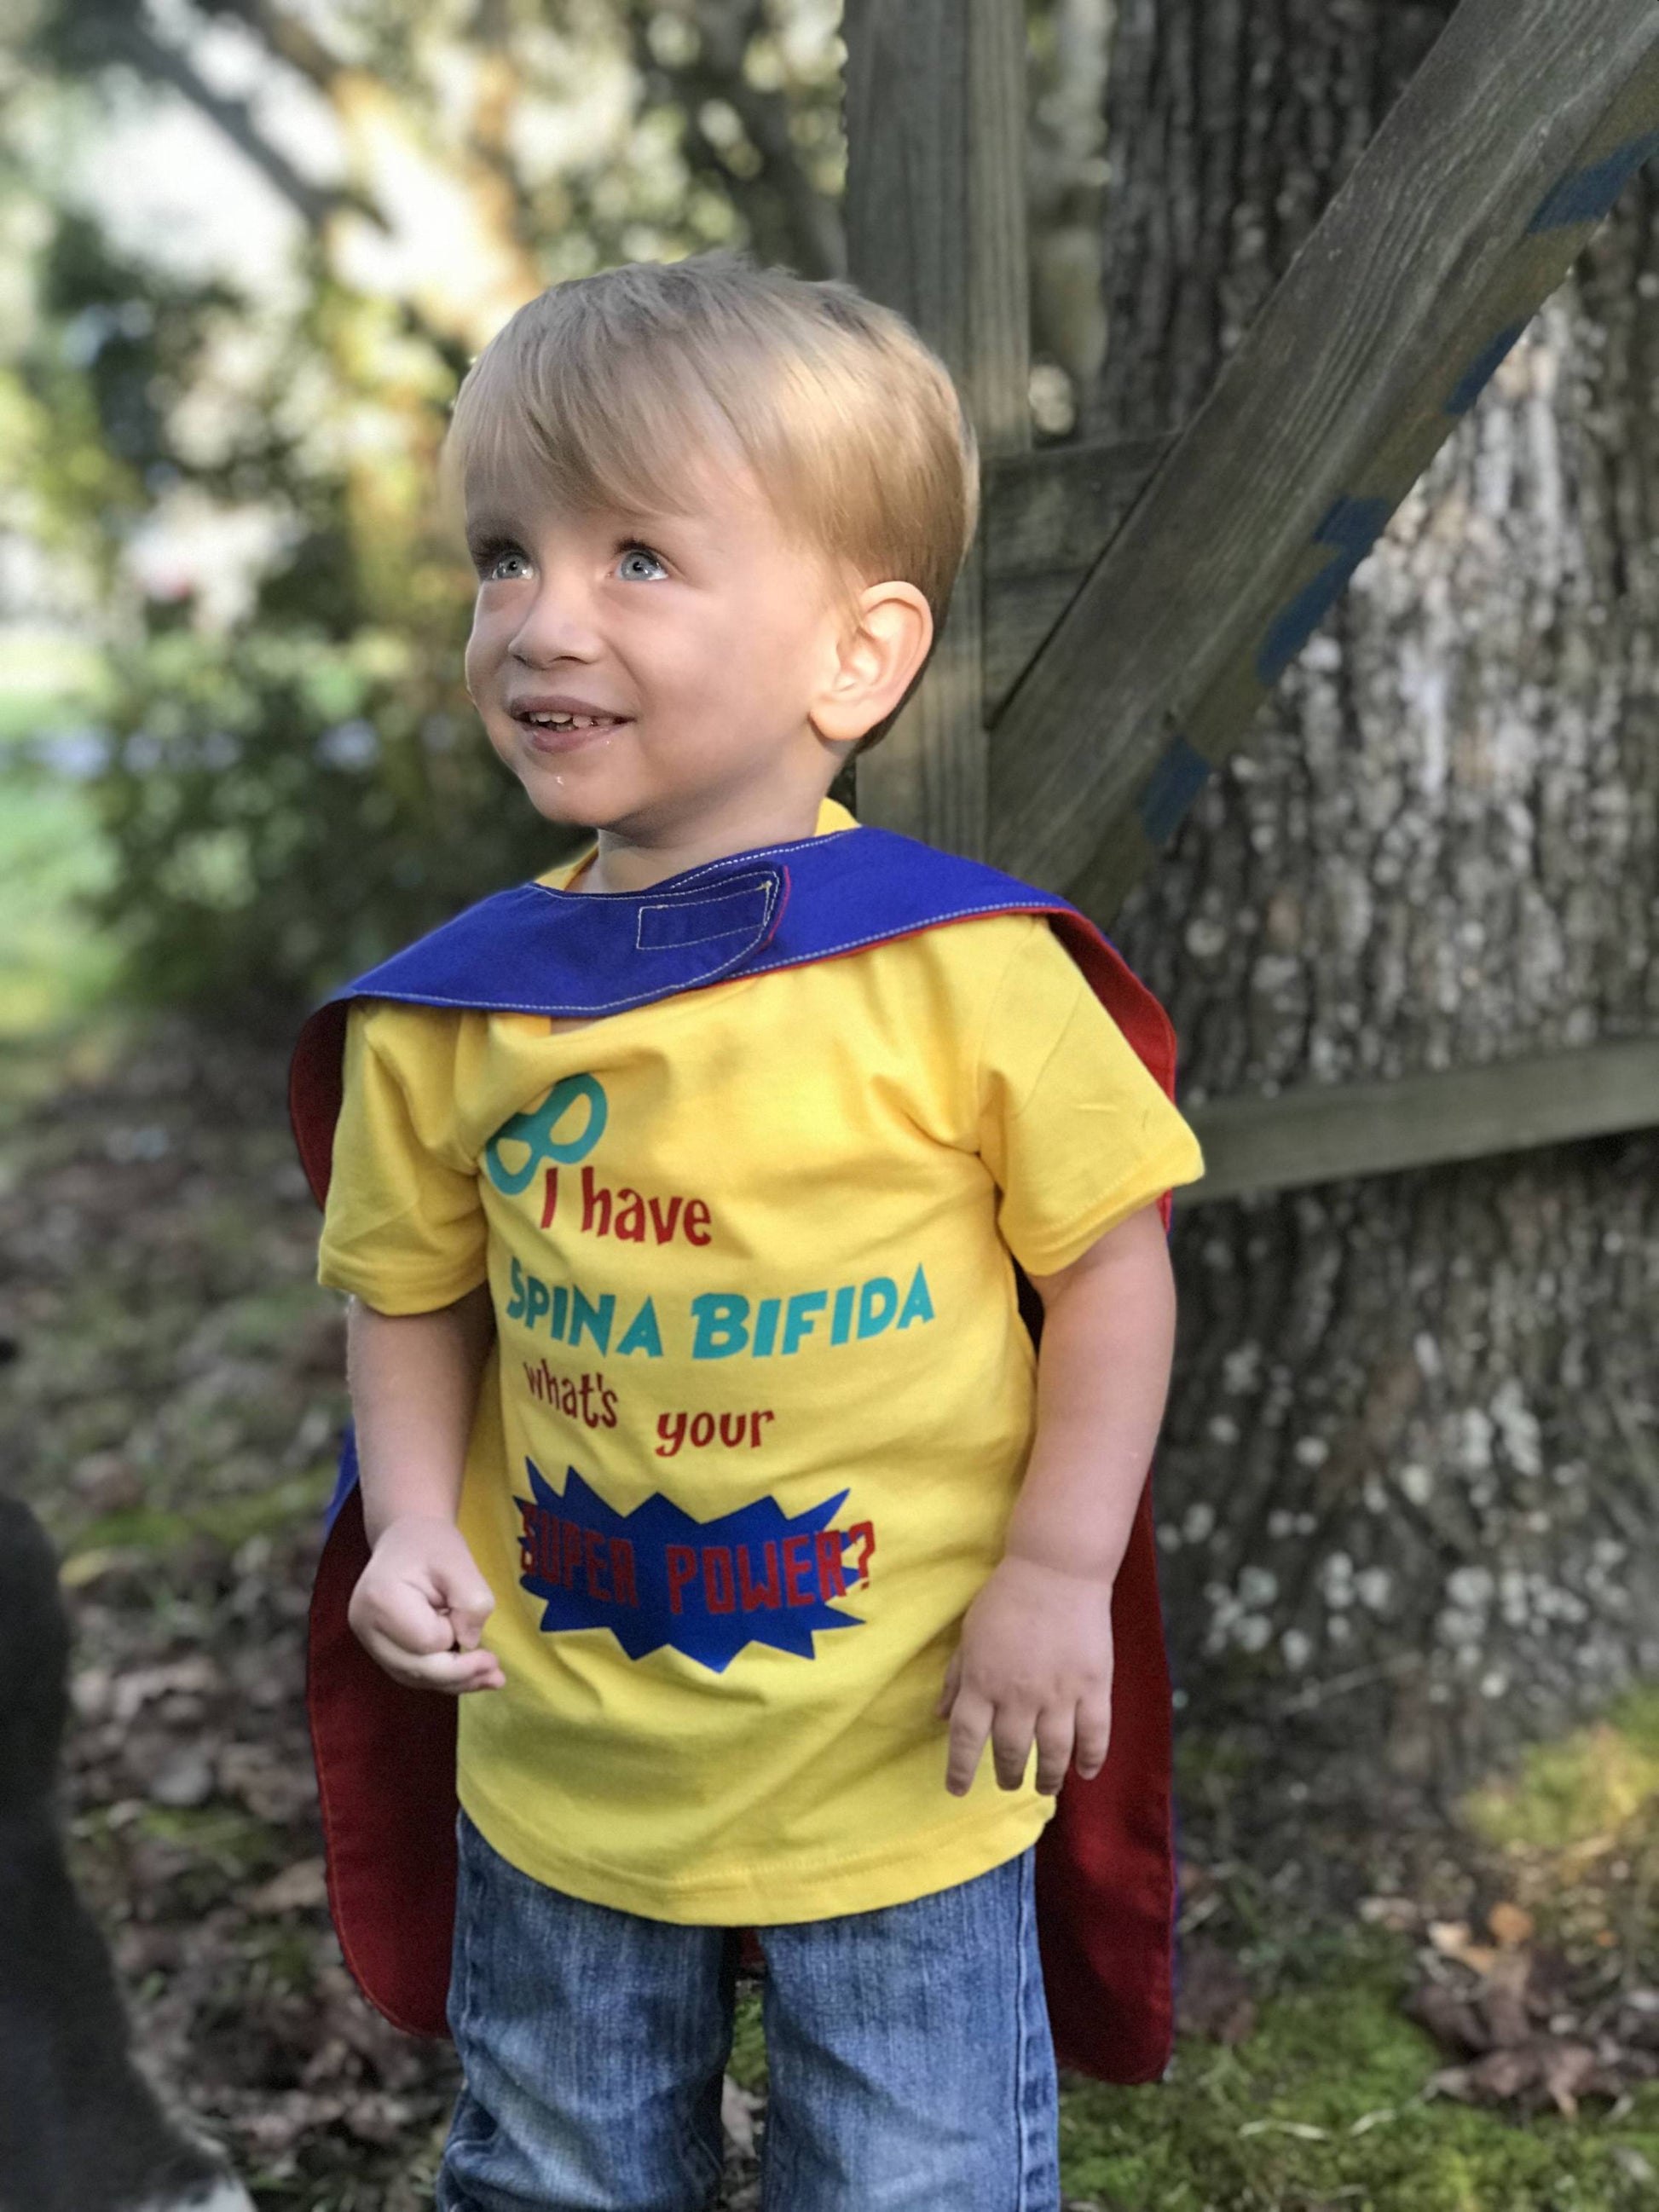 Handcrafted Children's Clothing, Clothing for Children and Parents, Spina Bifida Awareness Shirt - Super Hero inspired Special Needs Awareness shirt, chi-fashionista